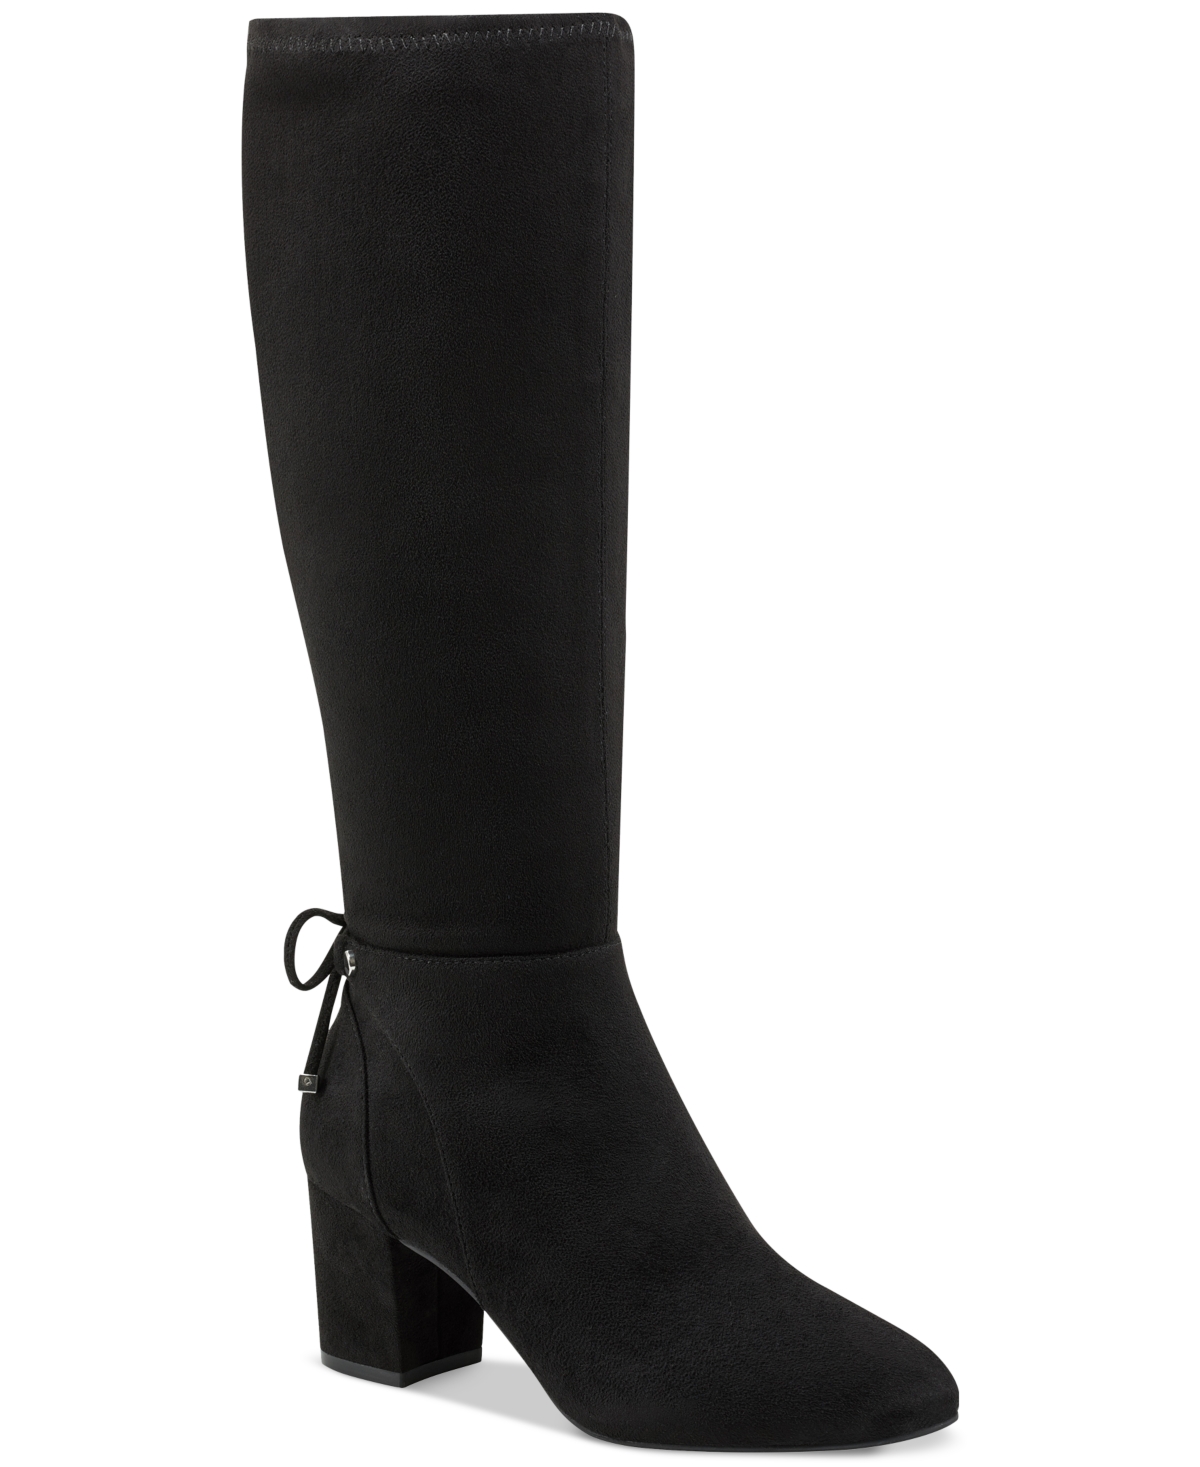 Mayviss Pointed-Toe Dress Boots, Created for Macy's - Black